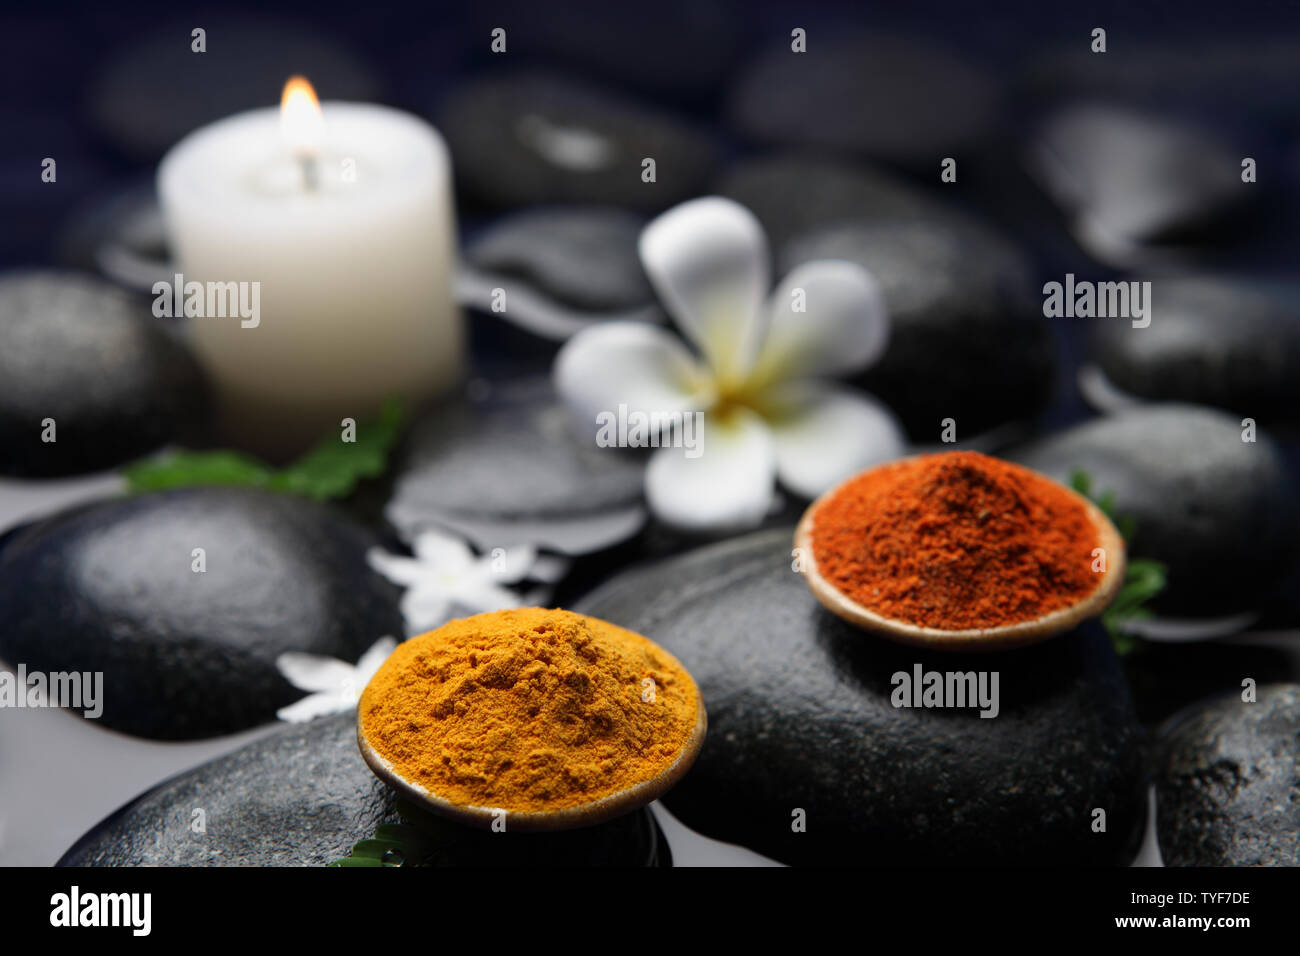 Herbal powder used in spa treatment Stock Photo